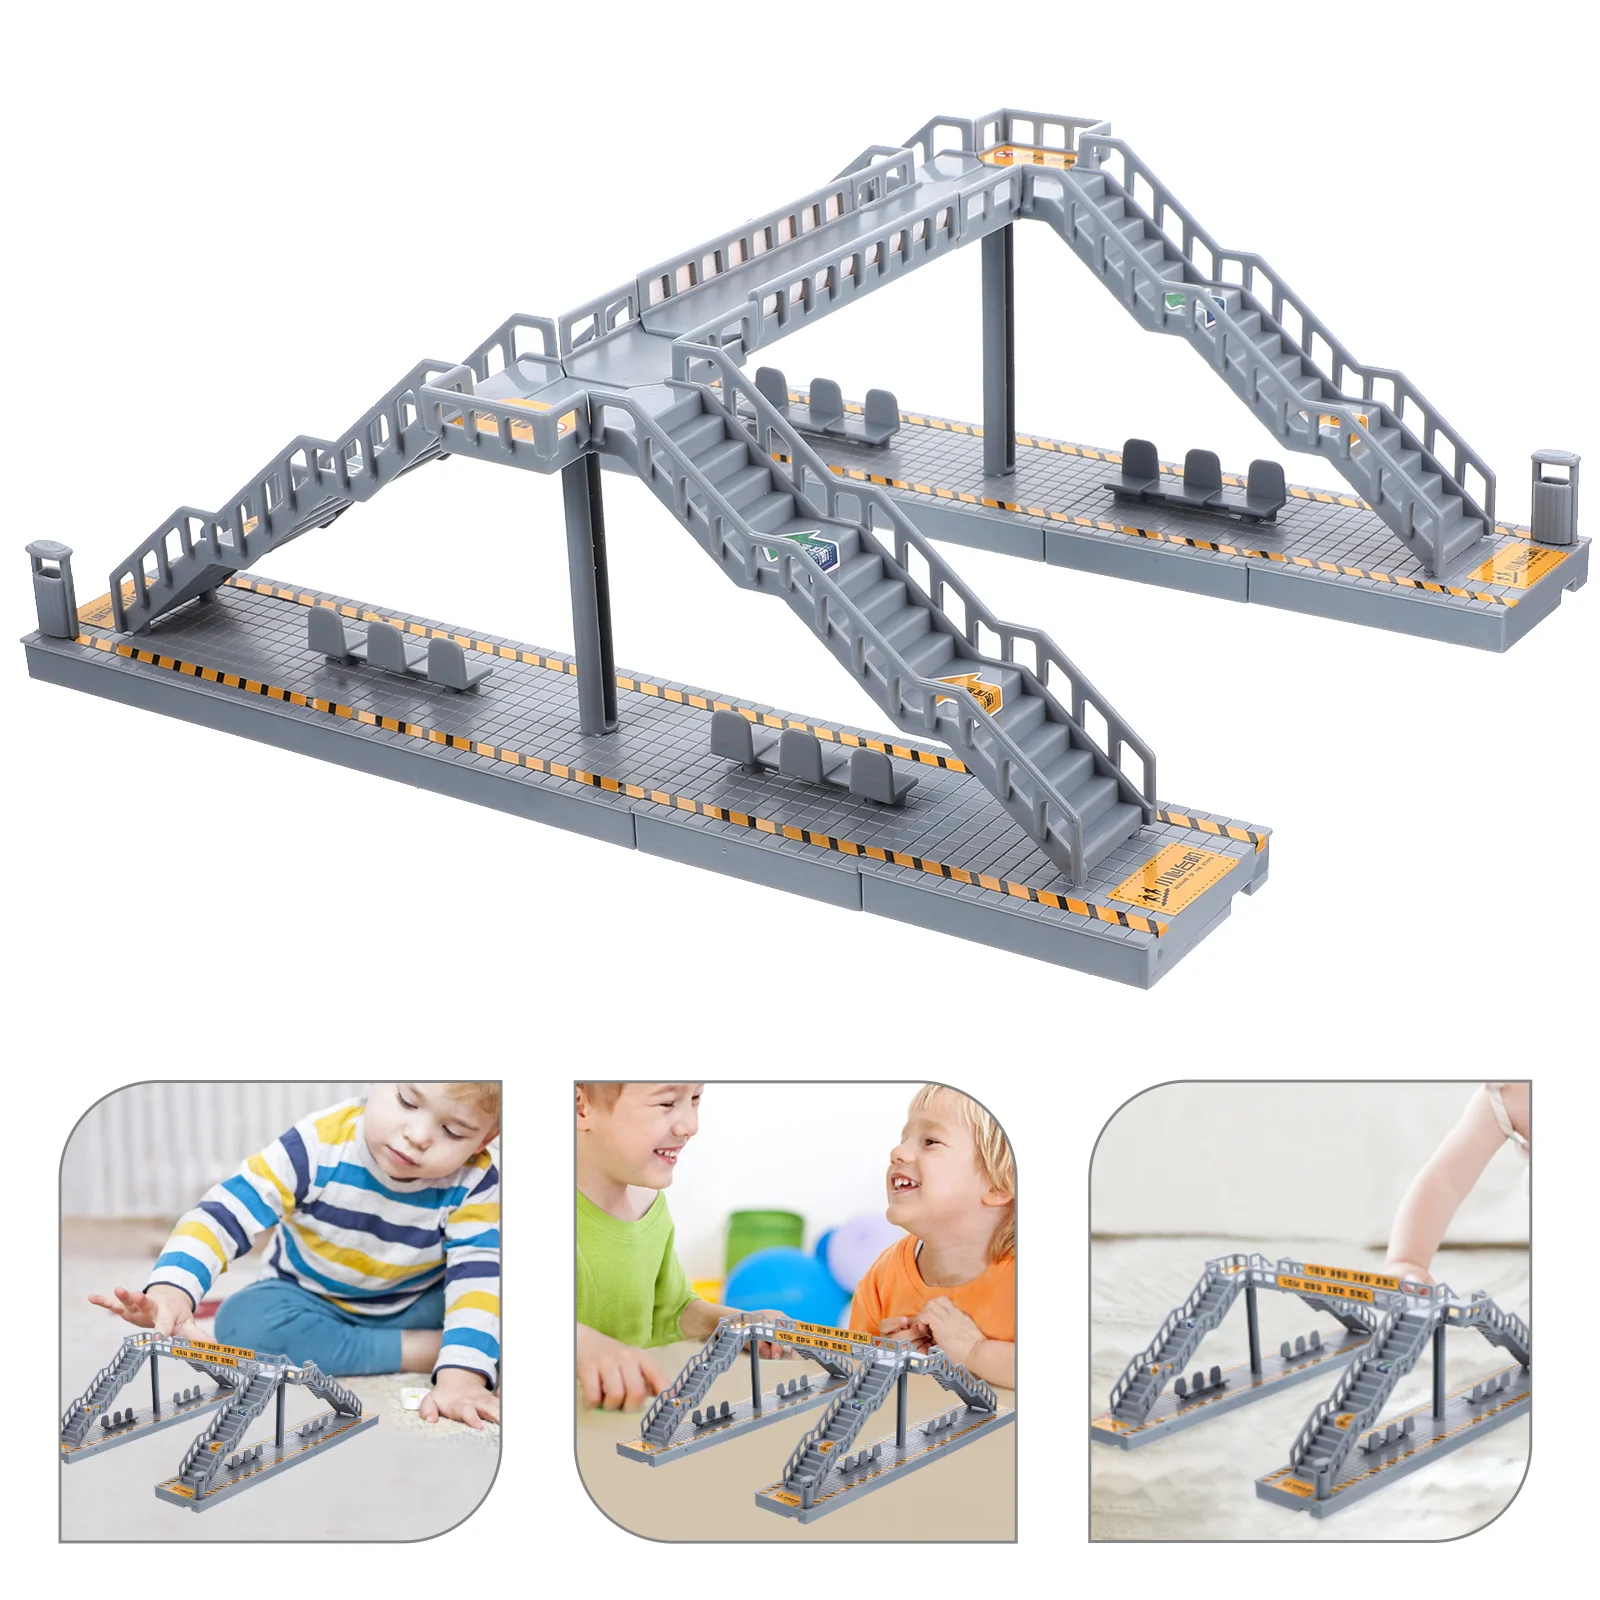 Pedestrian Bridge Puzzle Toy Plastic Footbridge Model Building Blocks Flyover Street Assembly Model For Children 12pcs set montessori diy assembly flapping wing flight for children flying kite paper airplane model imitate birds aircraft toys